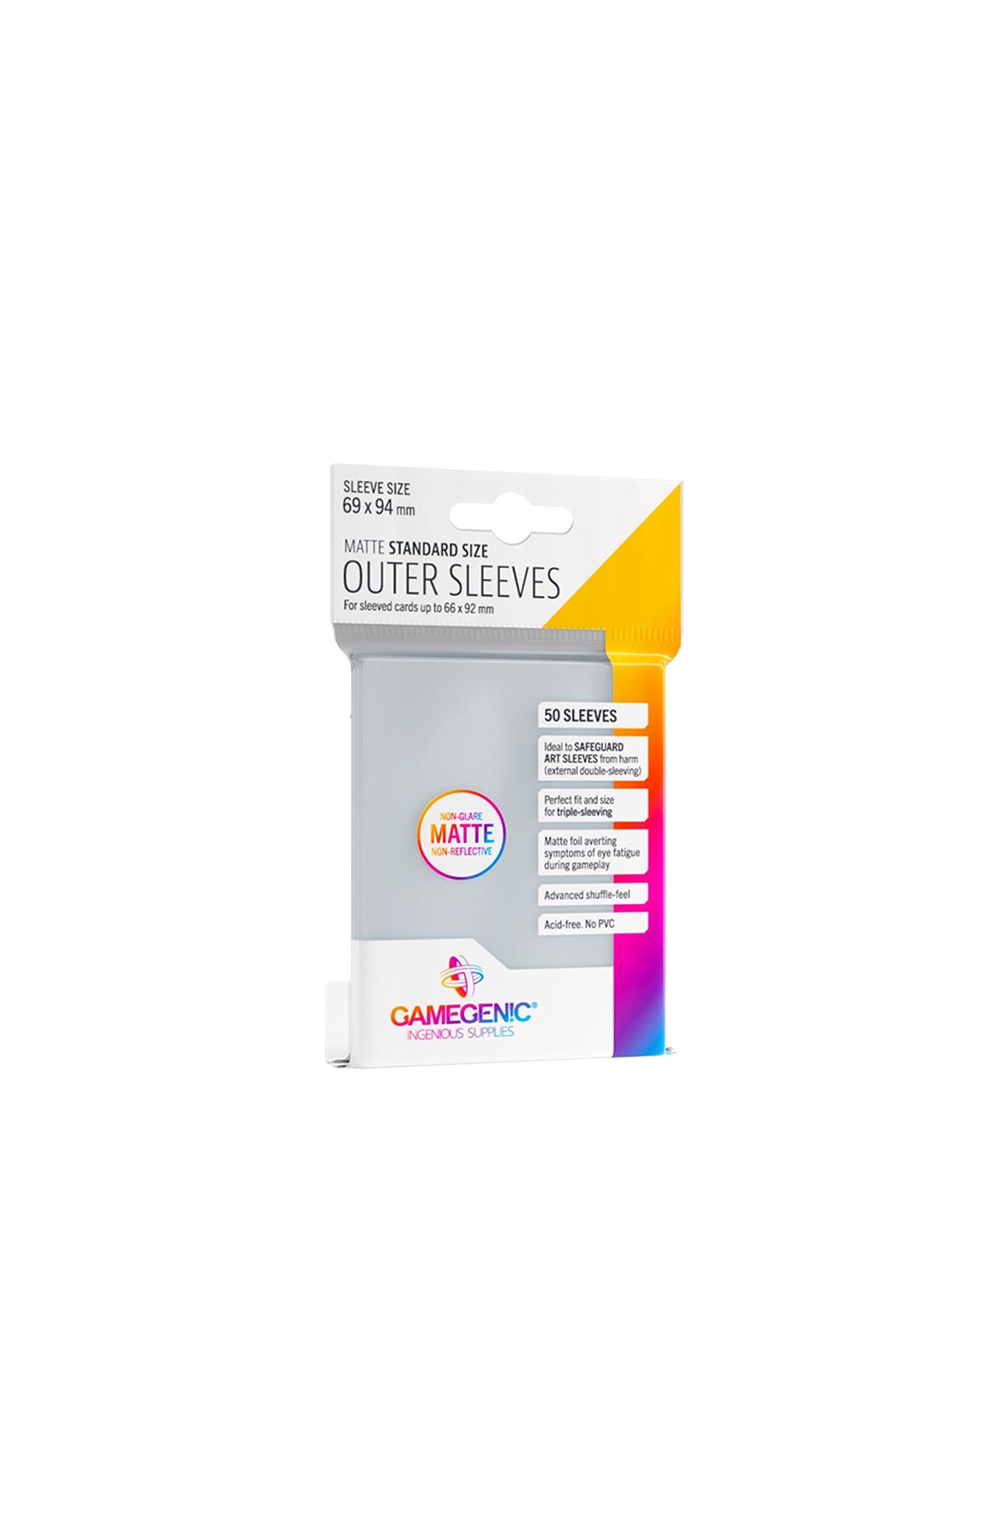 Outer Sleeves Matte Standard Size 69 X 94 Mm